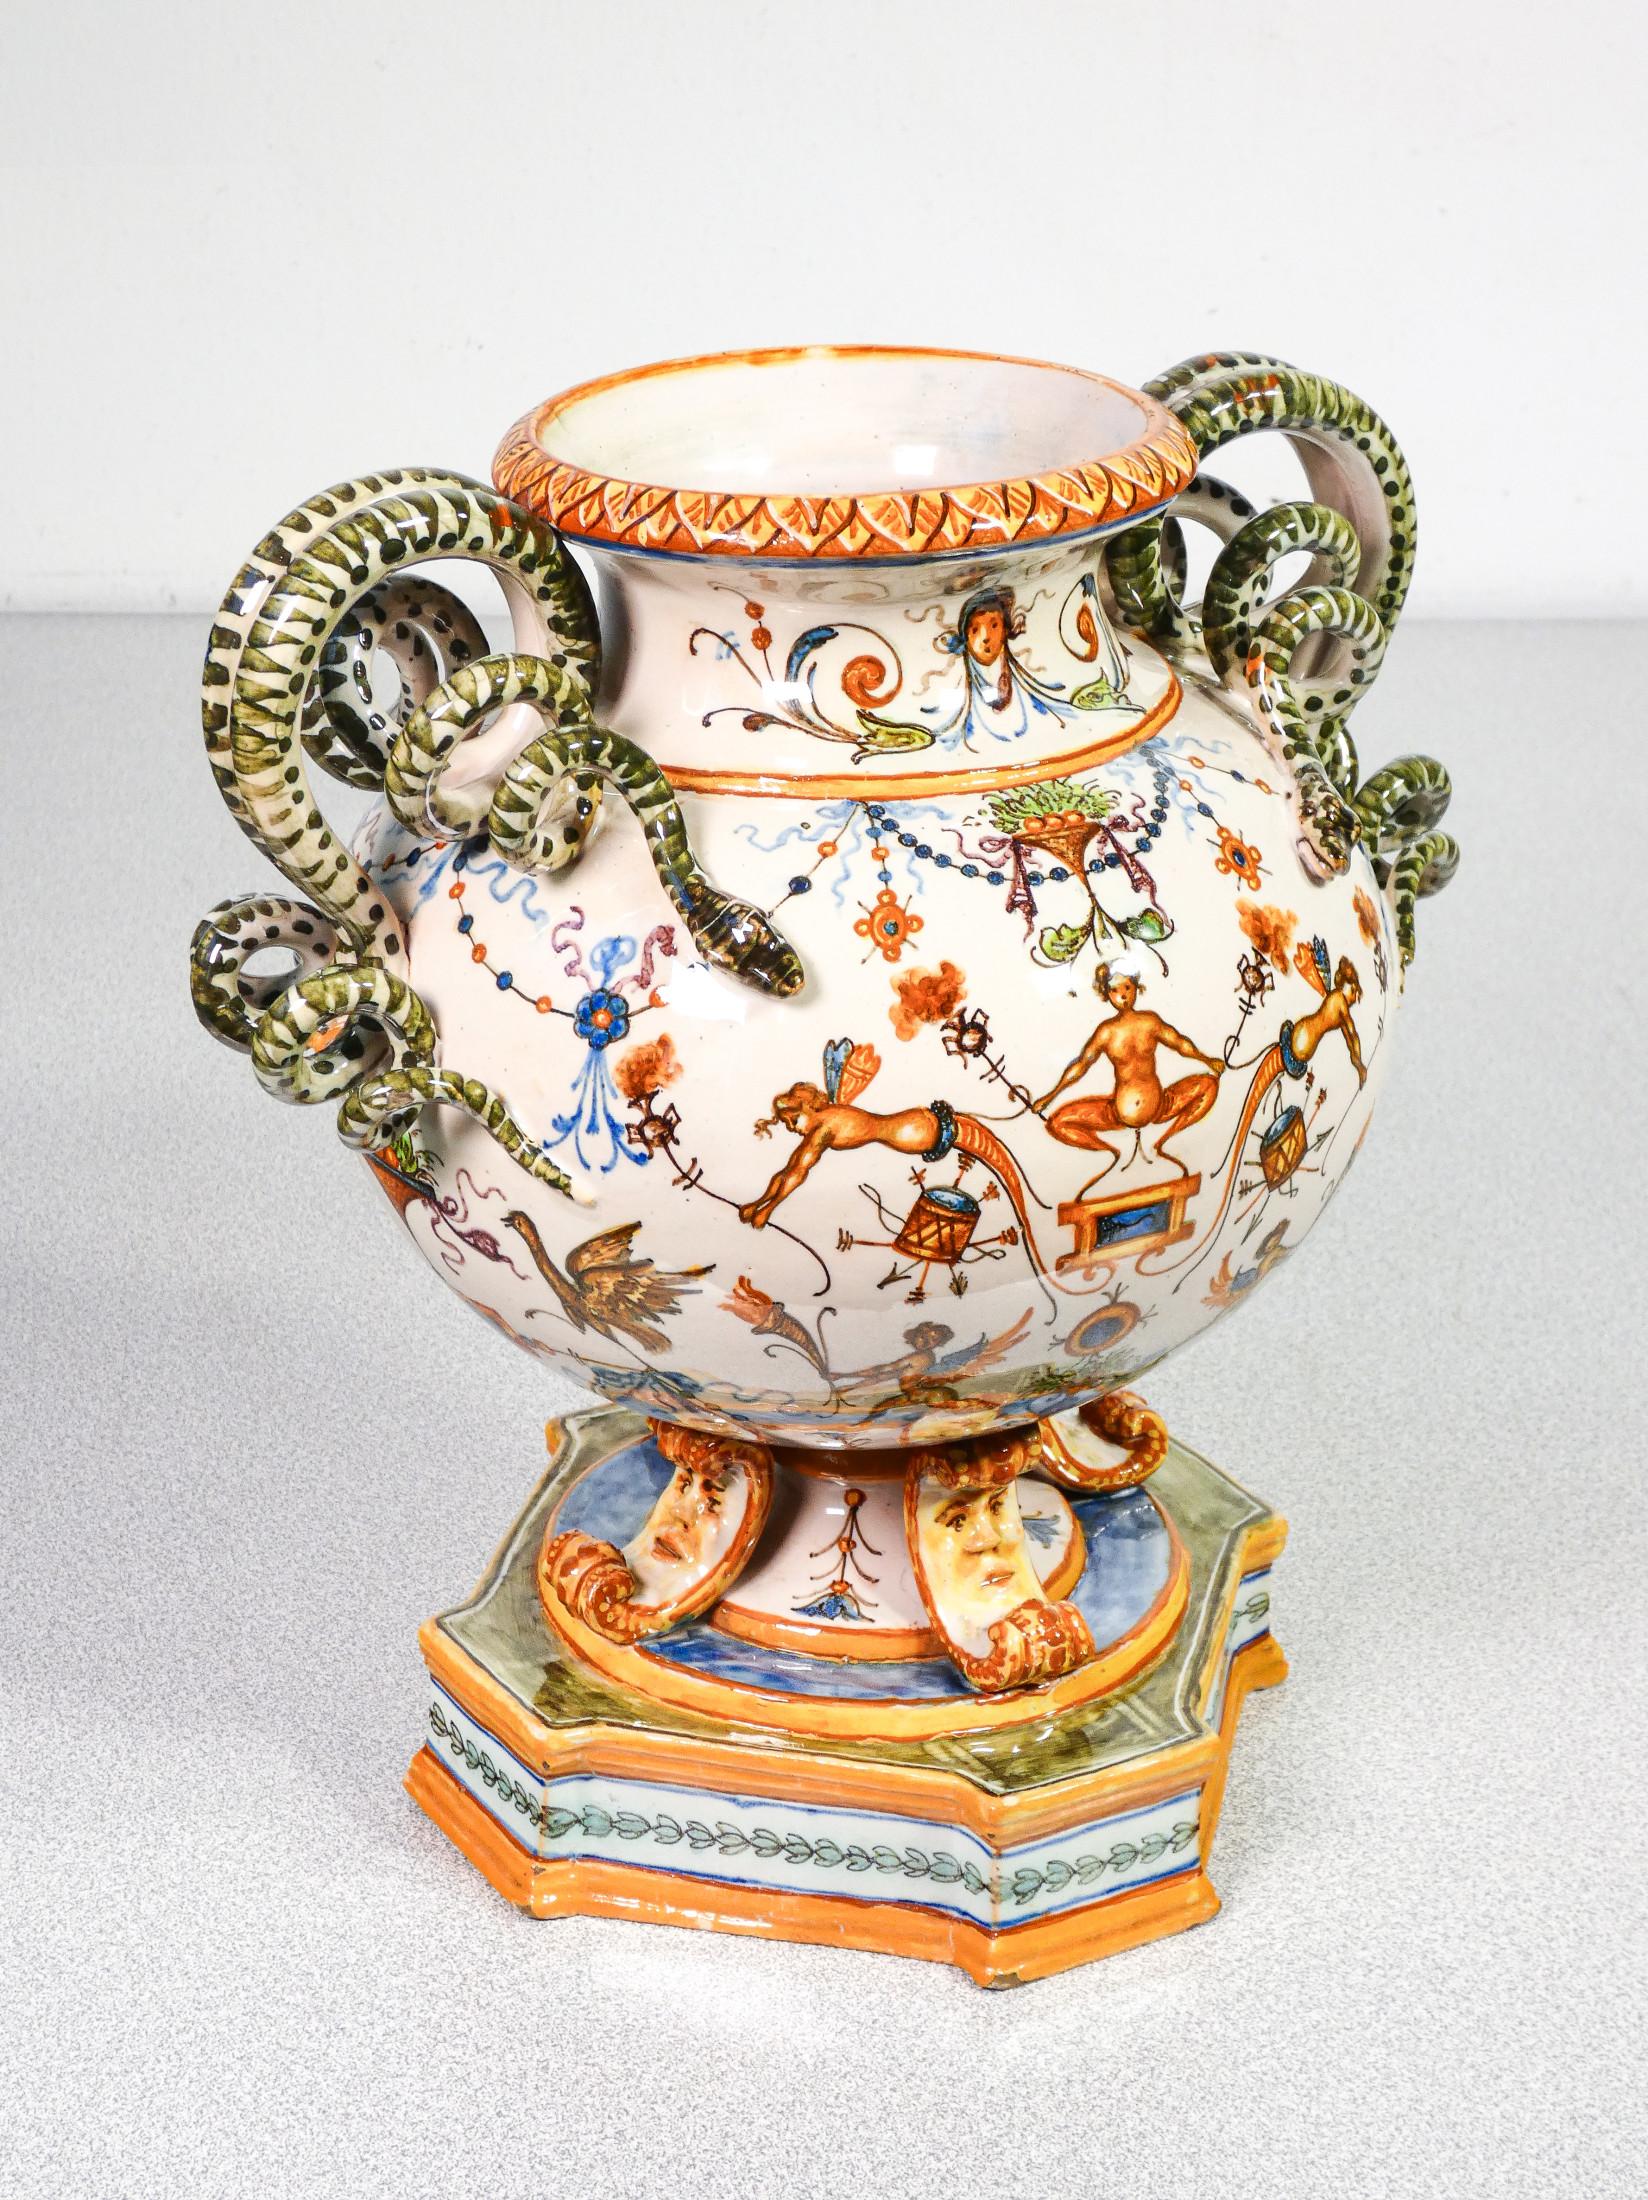 Molaroni
hand painted ceramic vase
with rich grotesques
and snake handles
Origin
Pesaro, Italy
Period
20s
Brand
Molaroni
Pesaro
Materials
Hand painted ceramic
Dimensions
H 23.5 cm
L 22 x 18 cm
Conditions
The vase is in very good